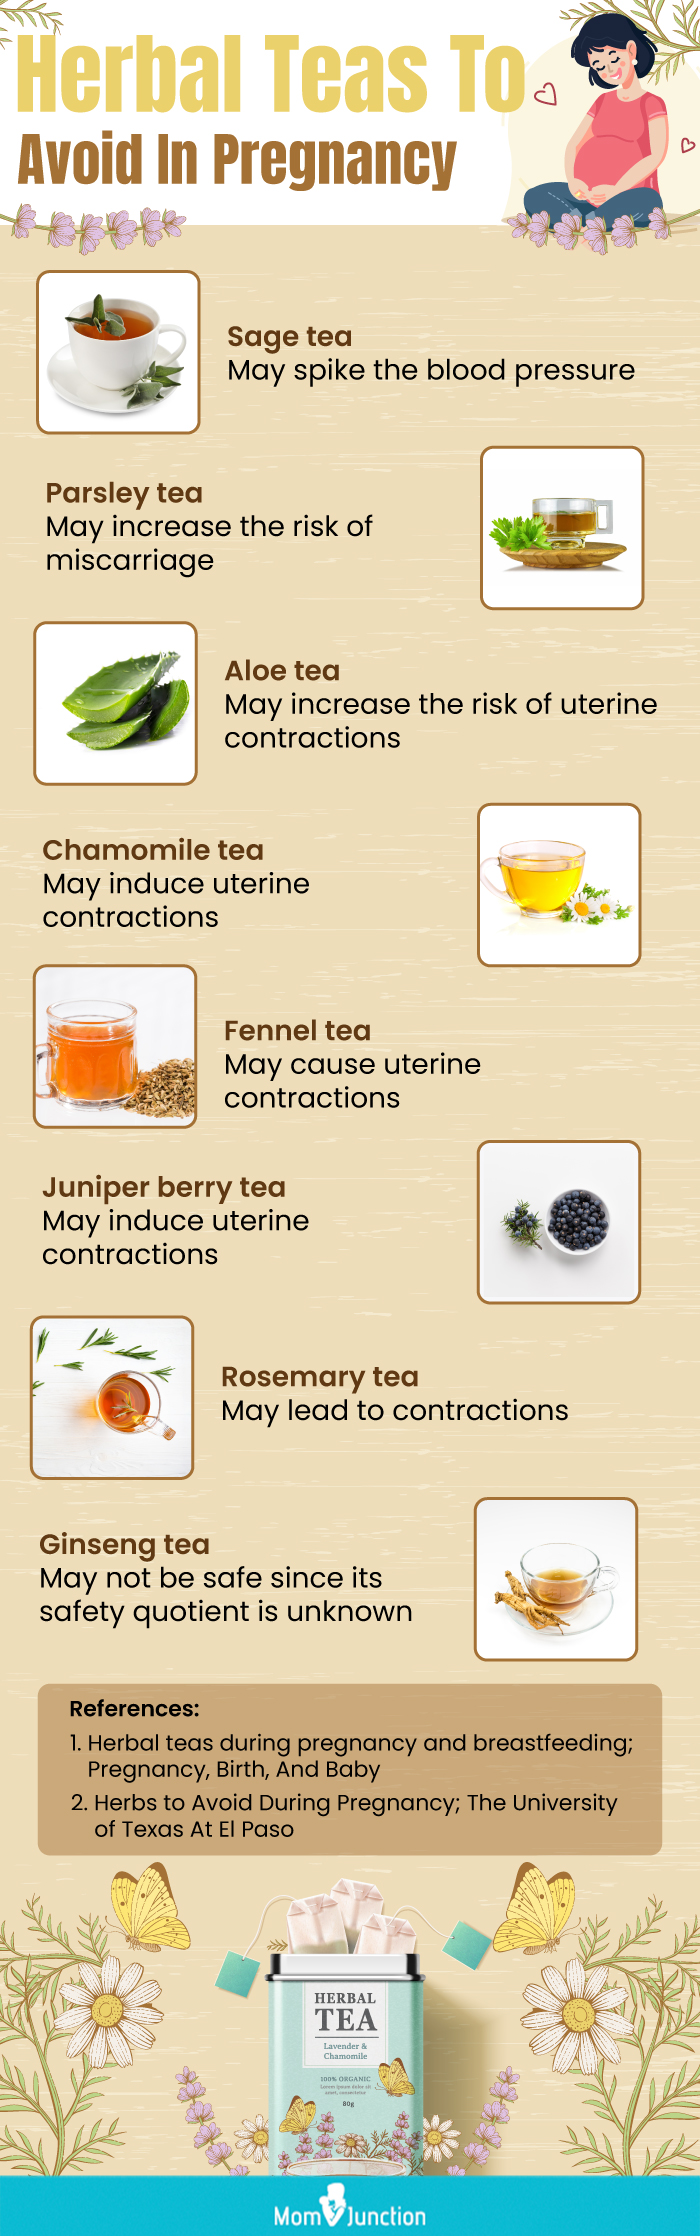 Herbal Teas To Avoid In Pregnancy (infographic)